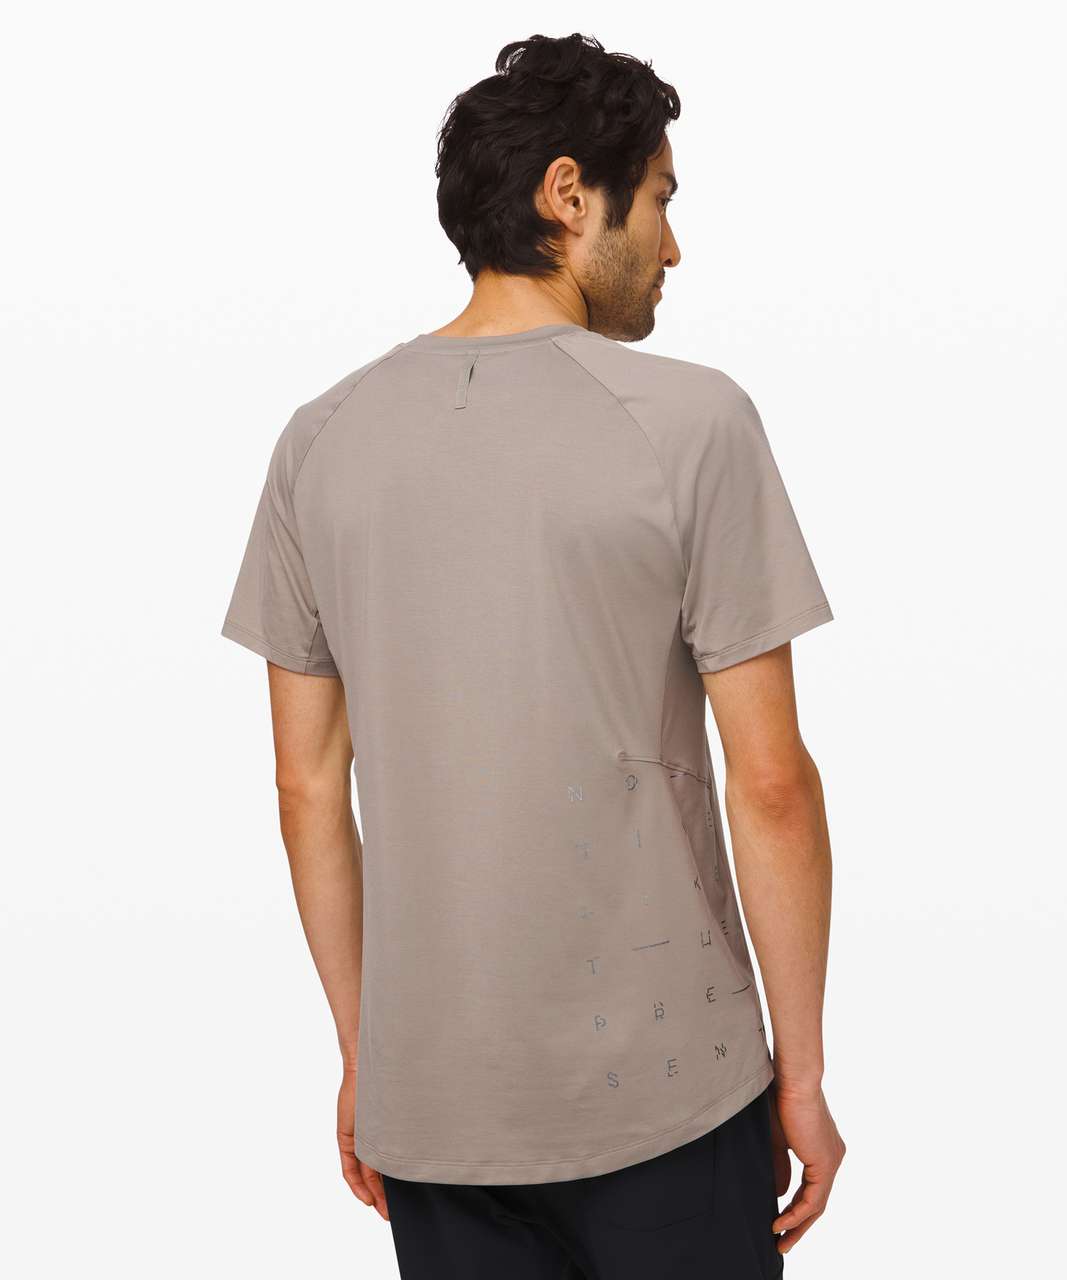 Lululemon Escape and Explore Tee *Lunar New Year - Carbon Dust